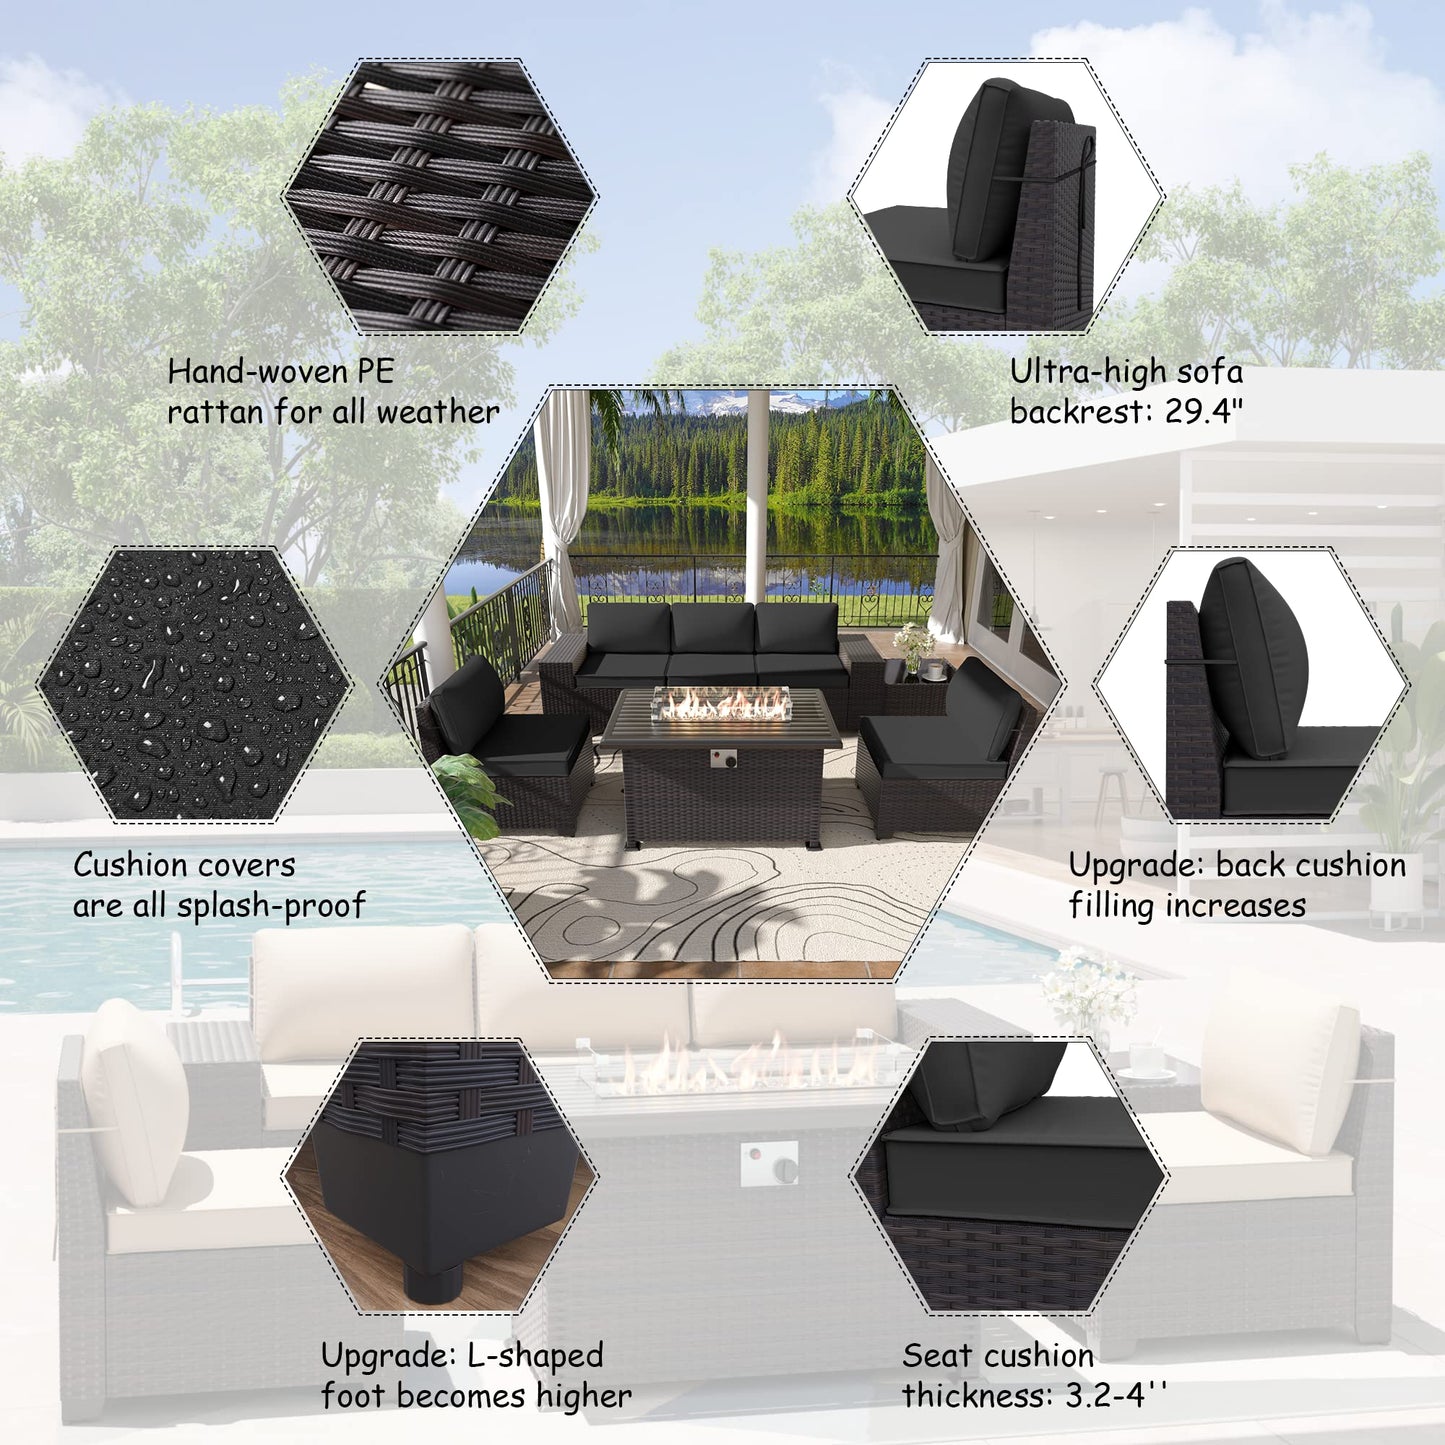 ALAULM 7 Pieces Outdoor Patio Furniture Set with Propane Fire Pit Table Patio Sectional Sofa Sets - Black